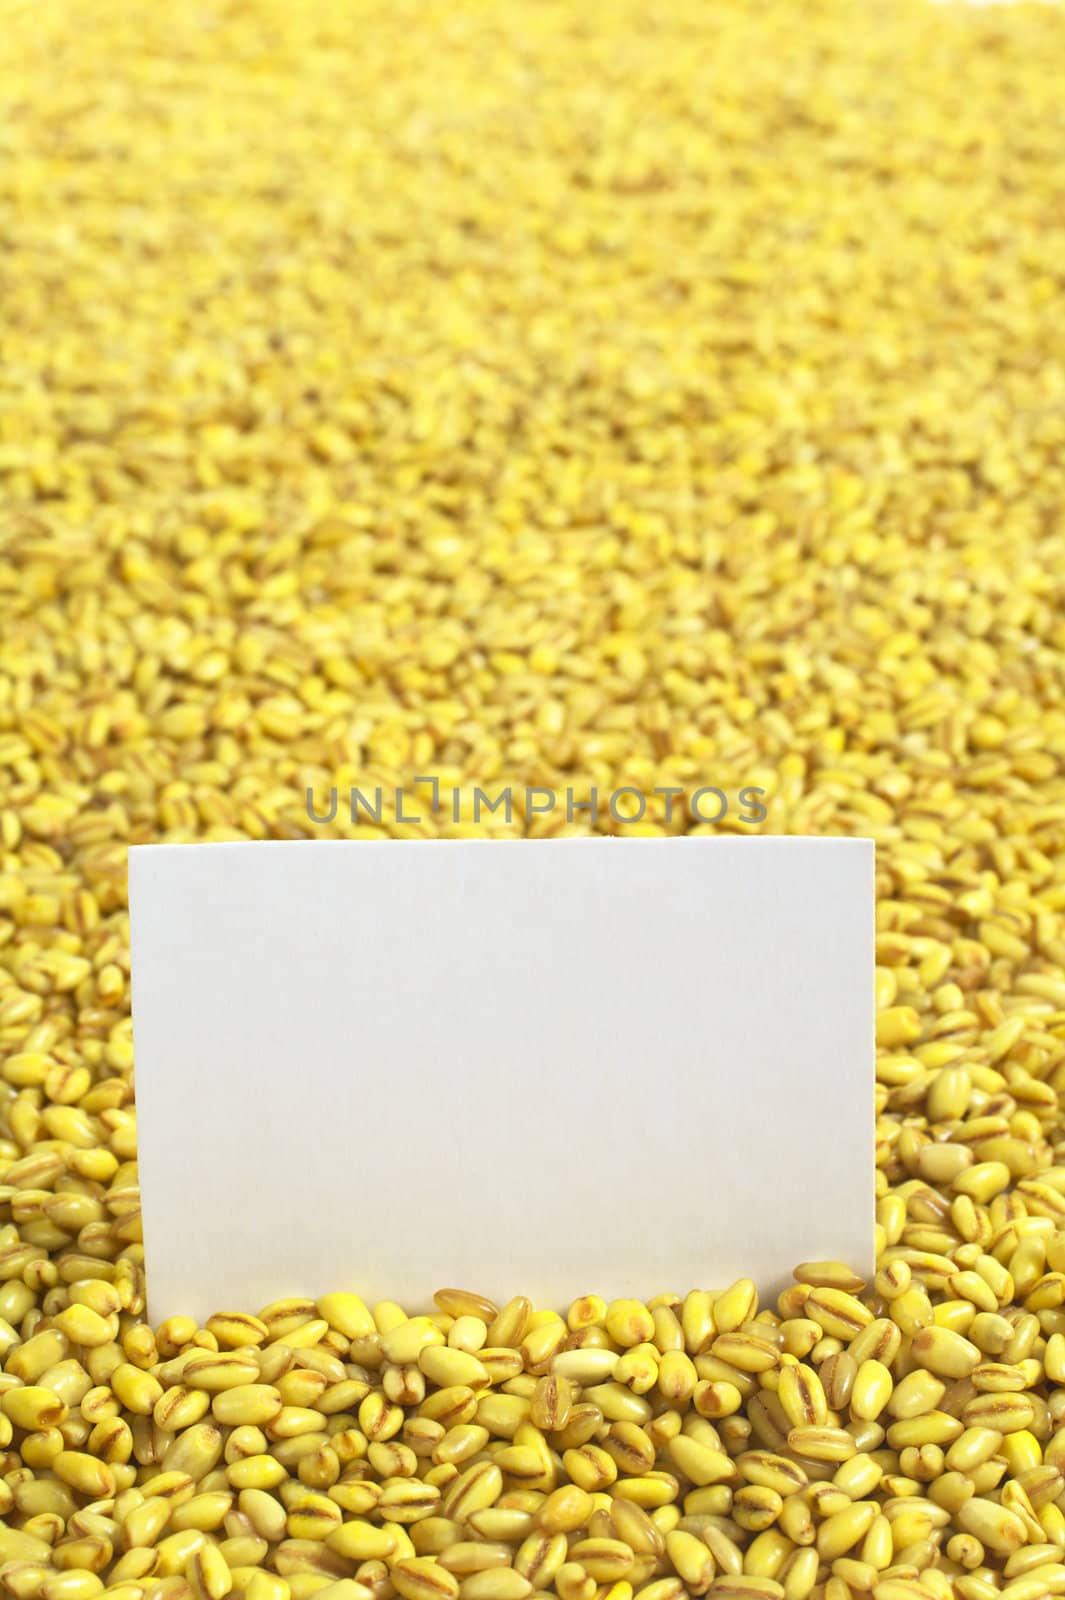 Raw pearl barley with a blank card (Selective Focus, Focus on the card)